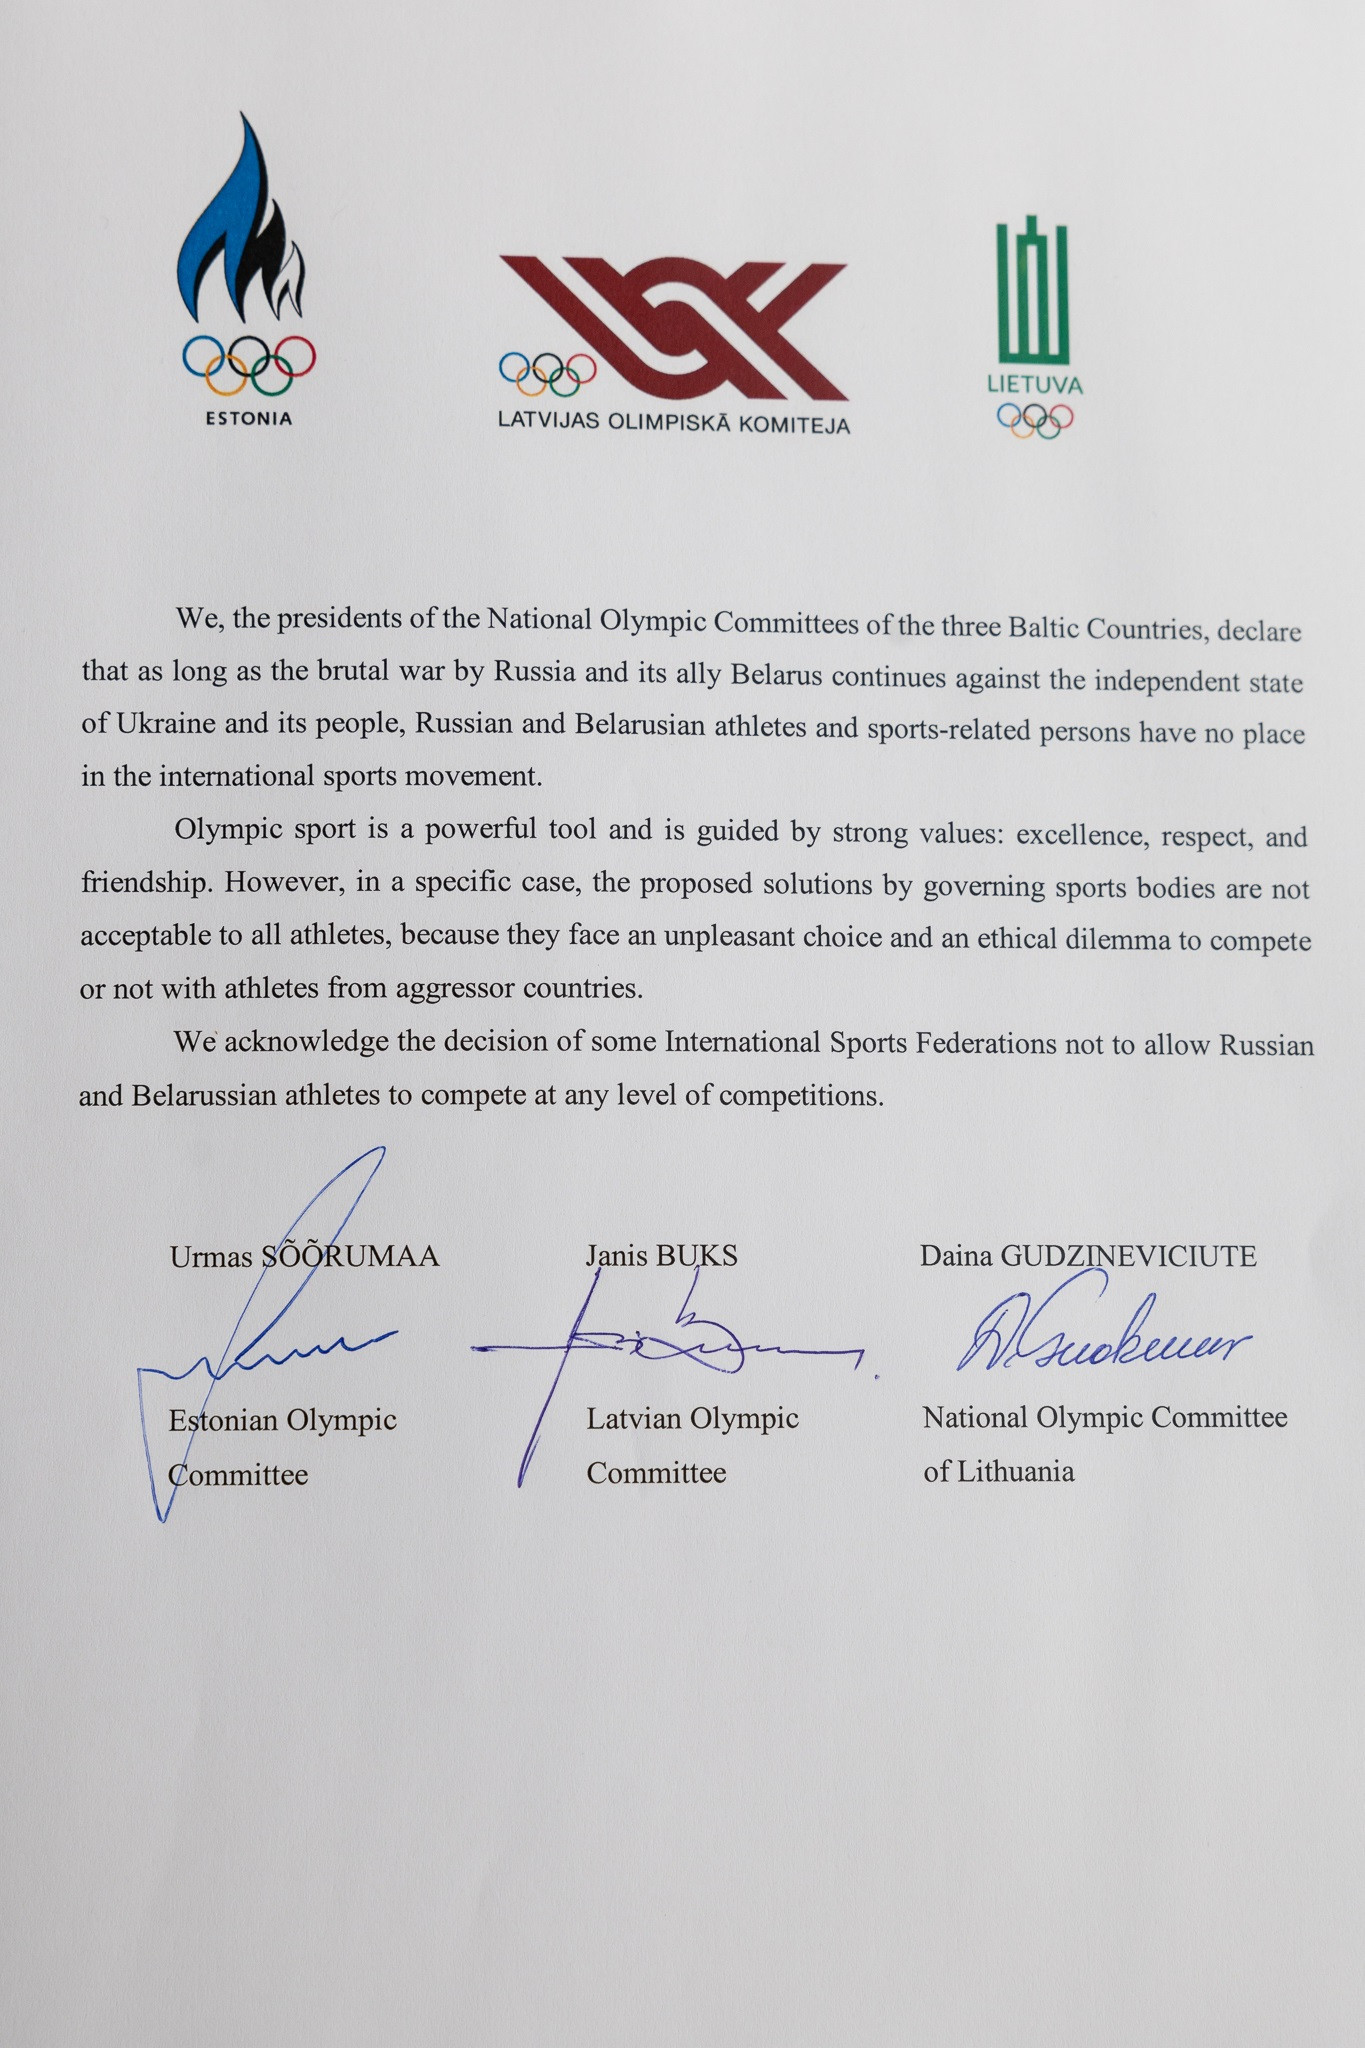 The joint statement insists Russia and Belarus should be excluded from international sport 